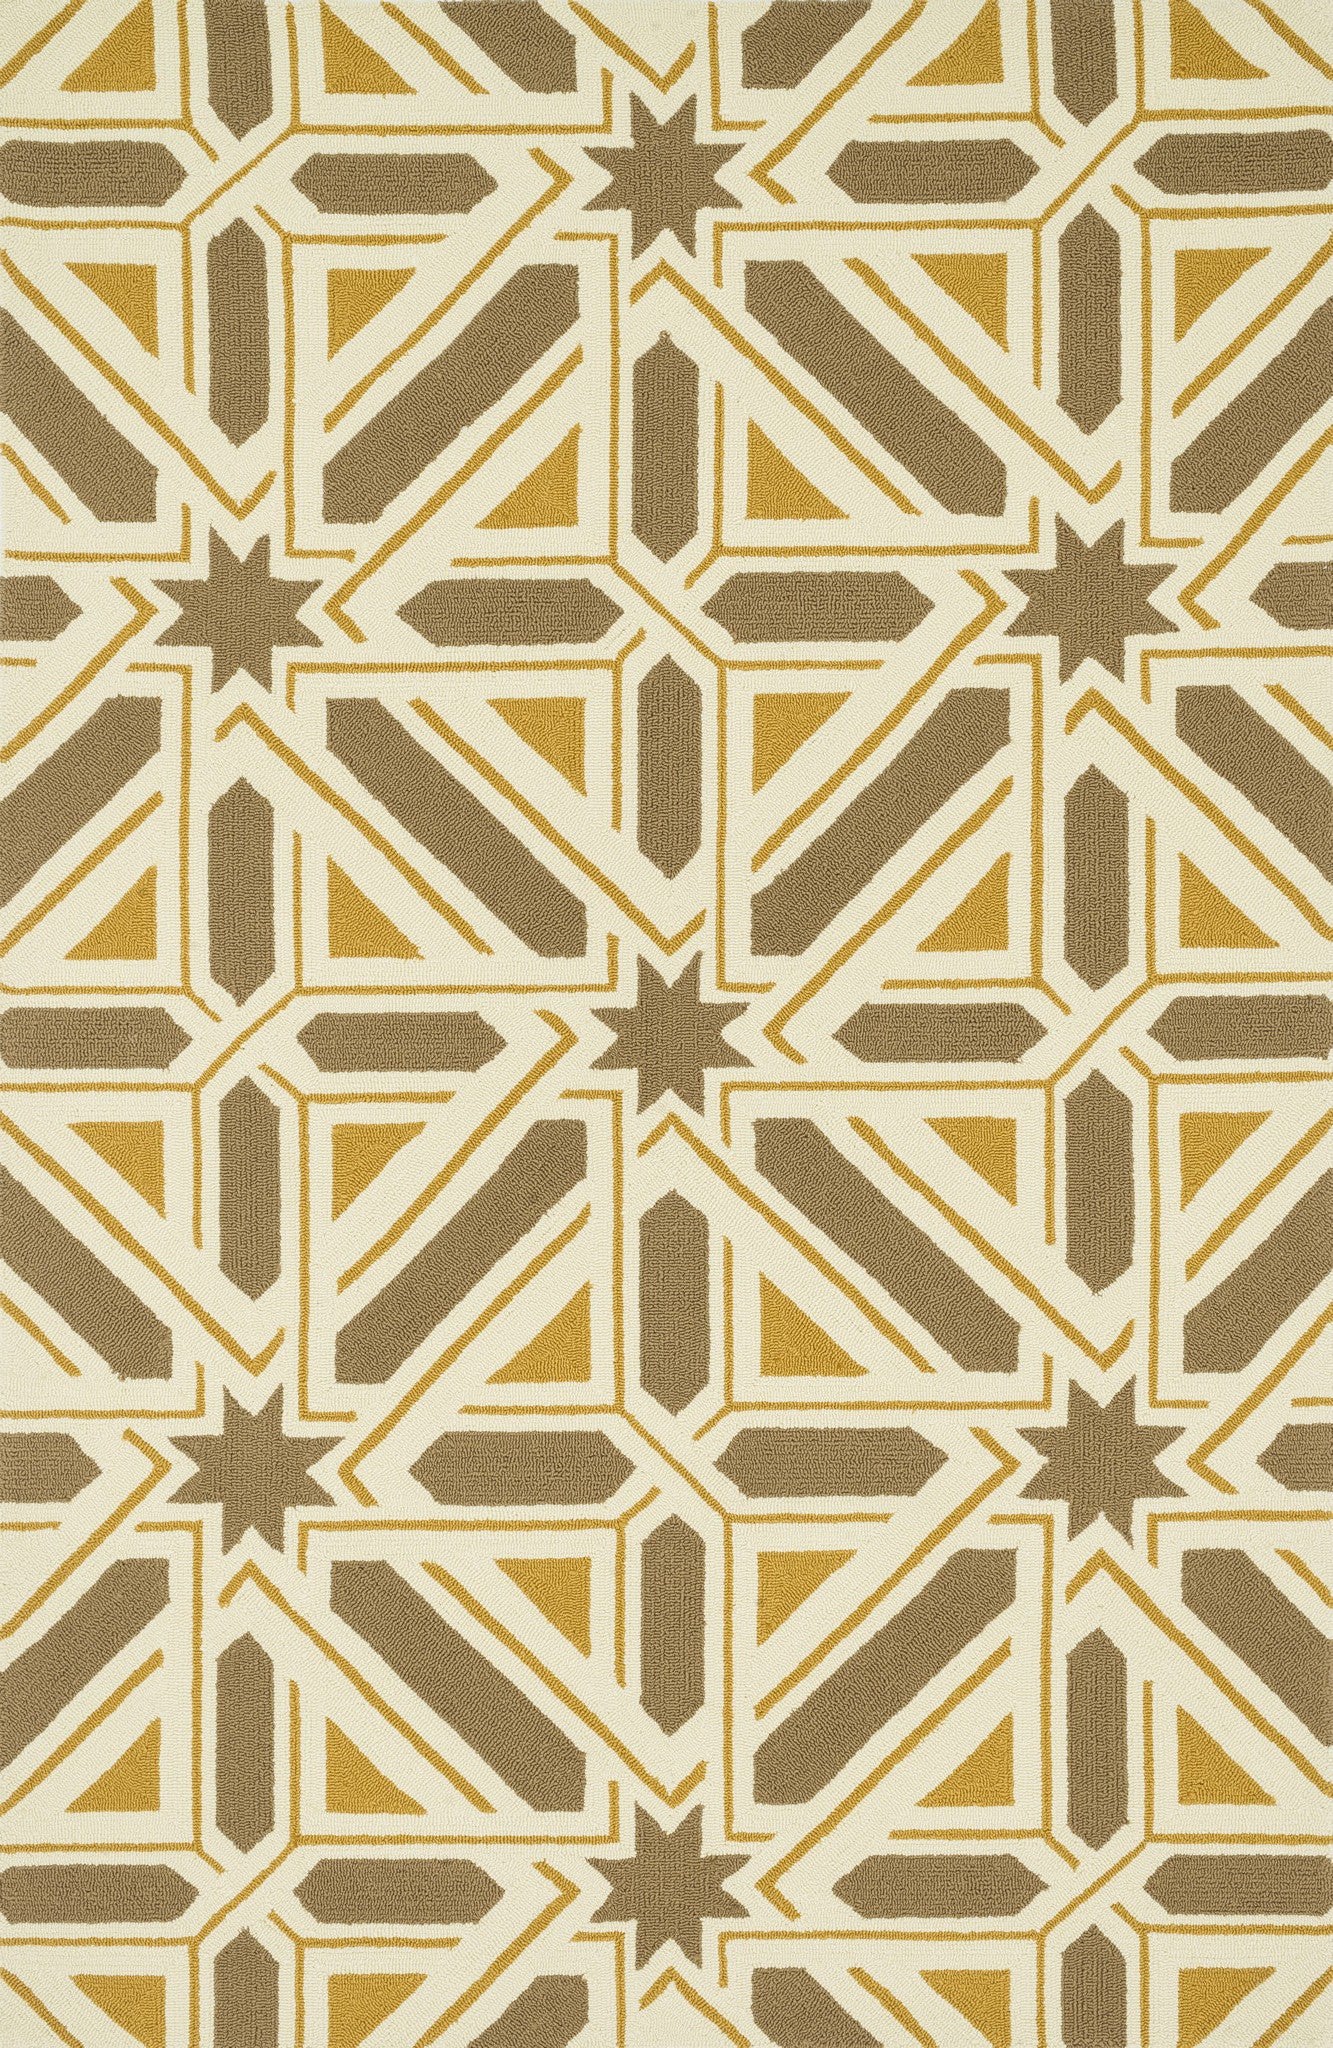 Loloi Palm Springs PM-04 Taupe / Gold Area Rug by Dann Foley main image